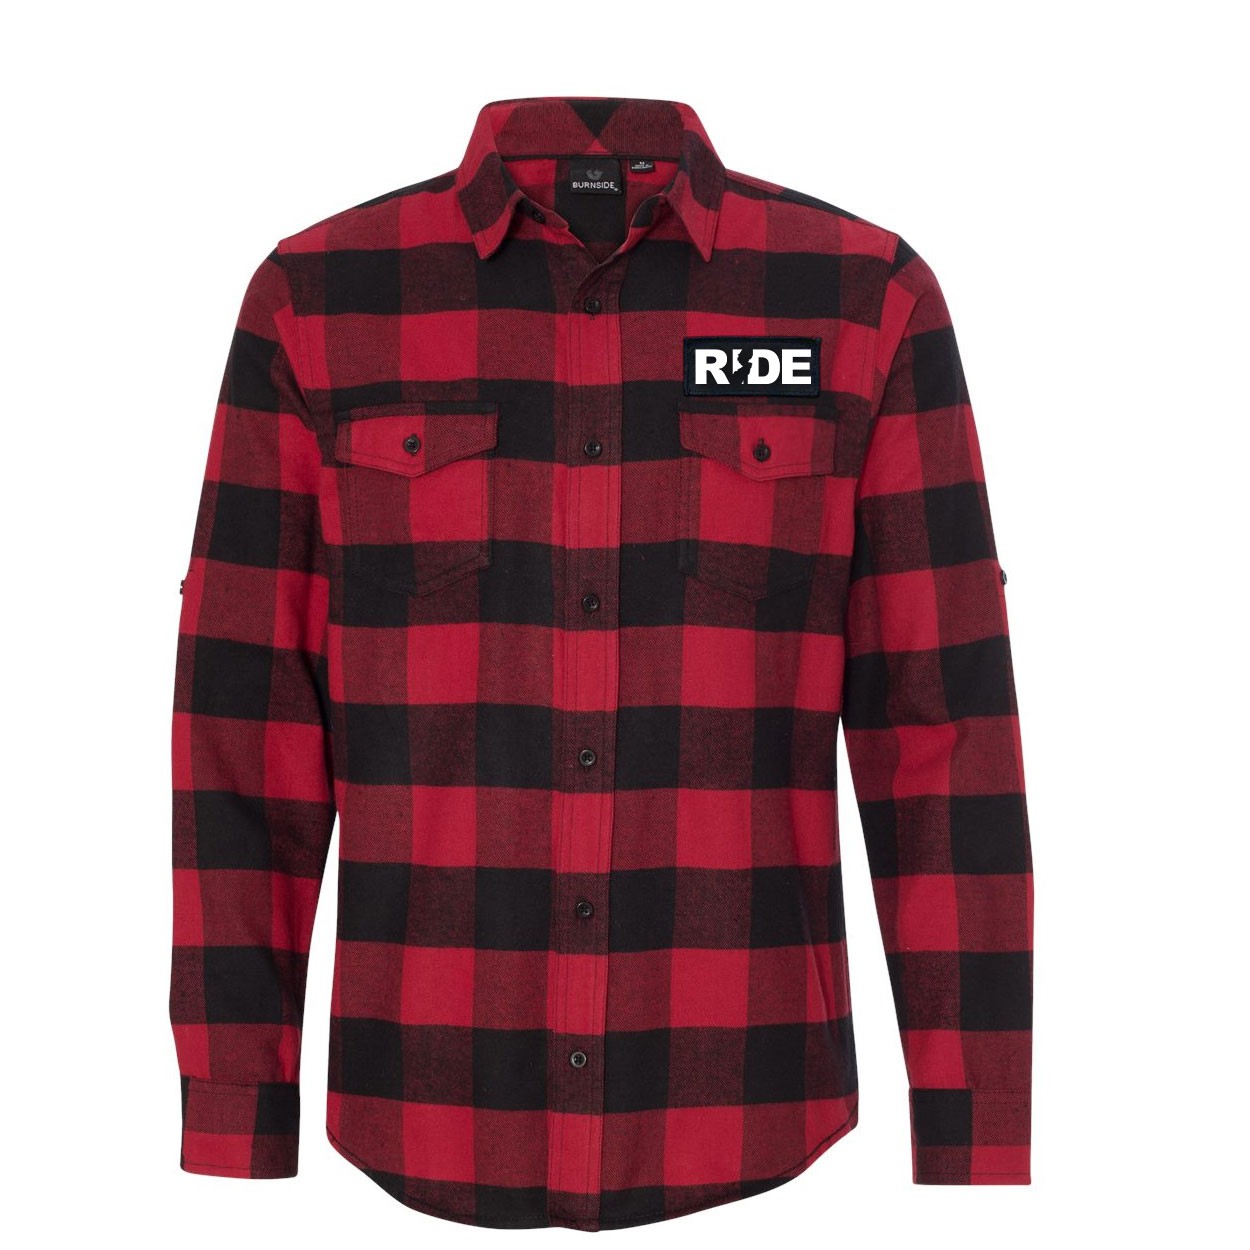 Ride New Jersey Classic Unisex Long Sleeve Woven Patch Flannel Shirt Red/Black Buffalo (White Logo)